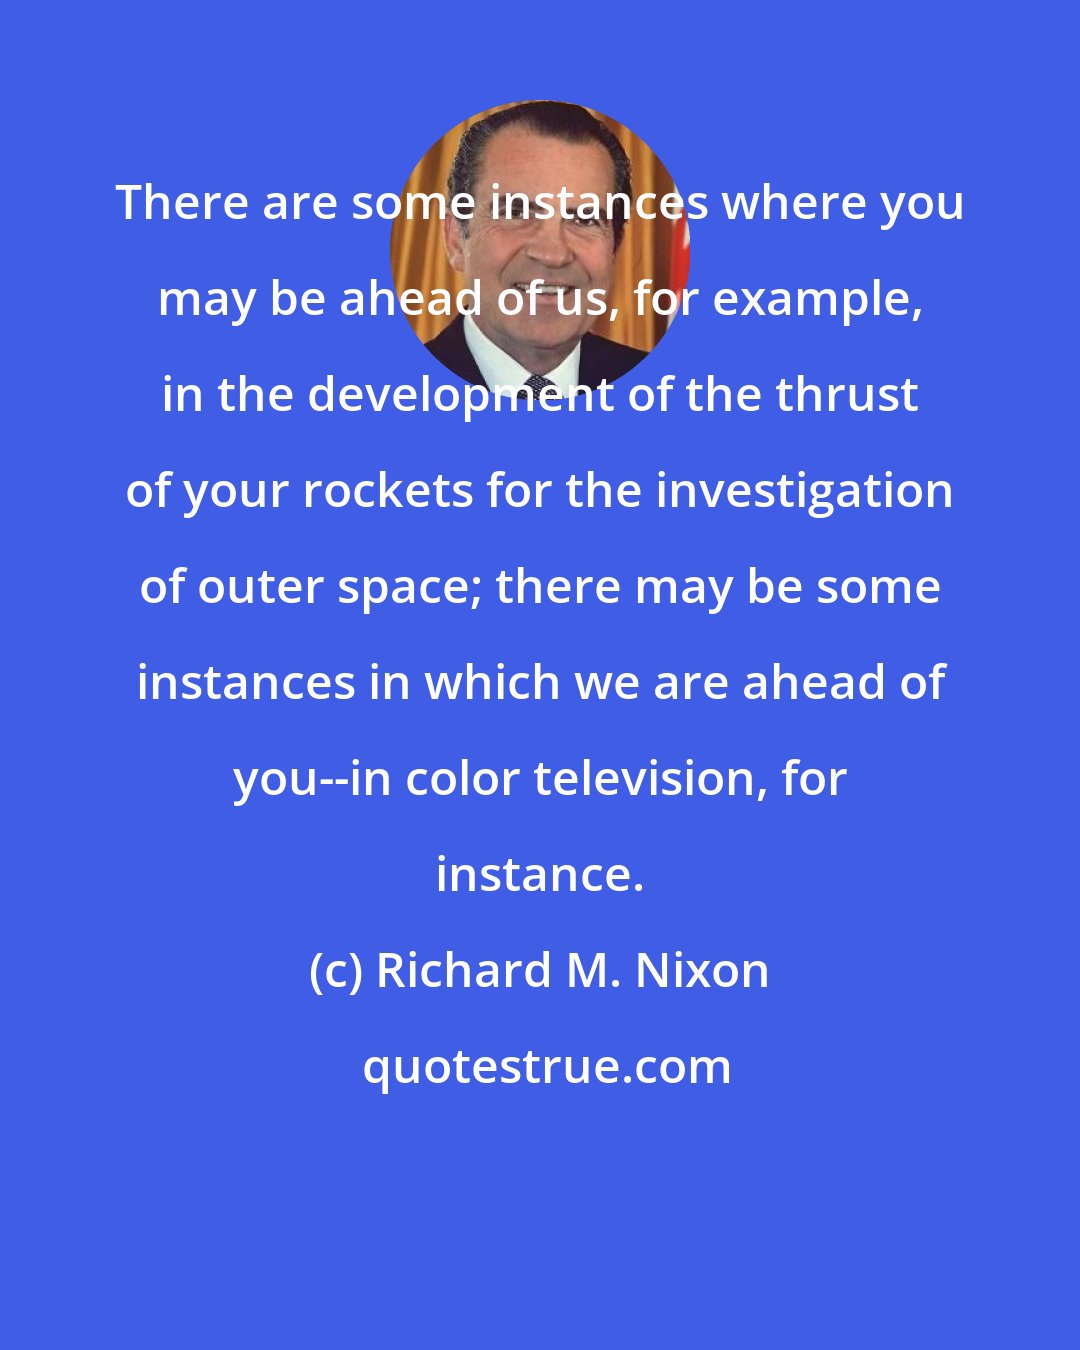 Richard M. Nixon: There are some instances where you may be ahead of us, for example, in the development of the thrust of your rockets for the investigation of outer space; there may be some instances in which we are ahead of you--in color television, for instance.